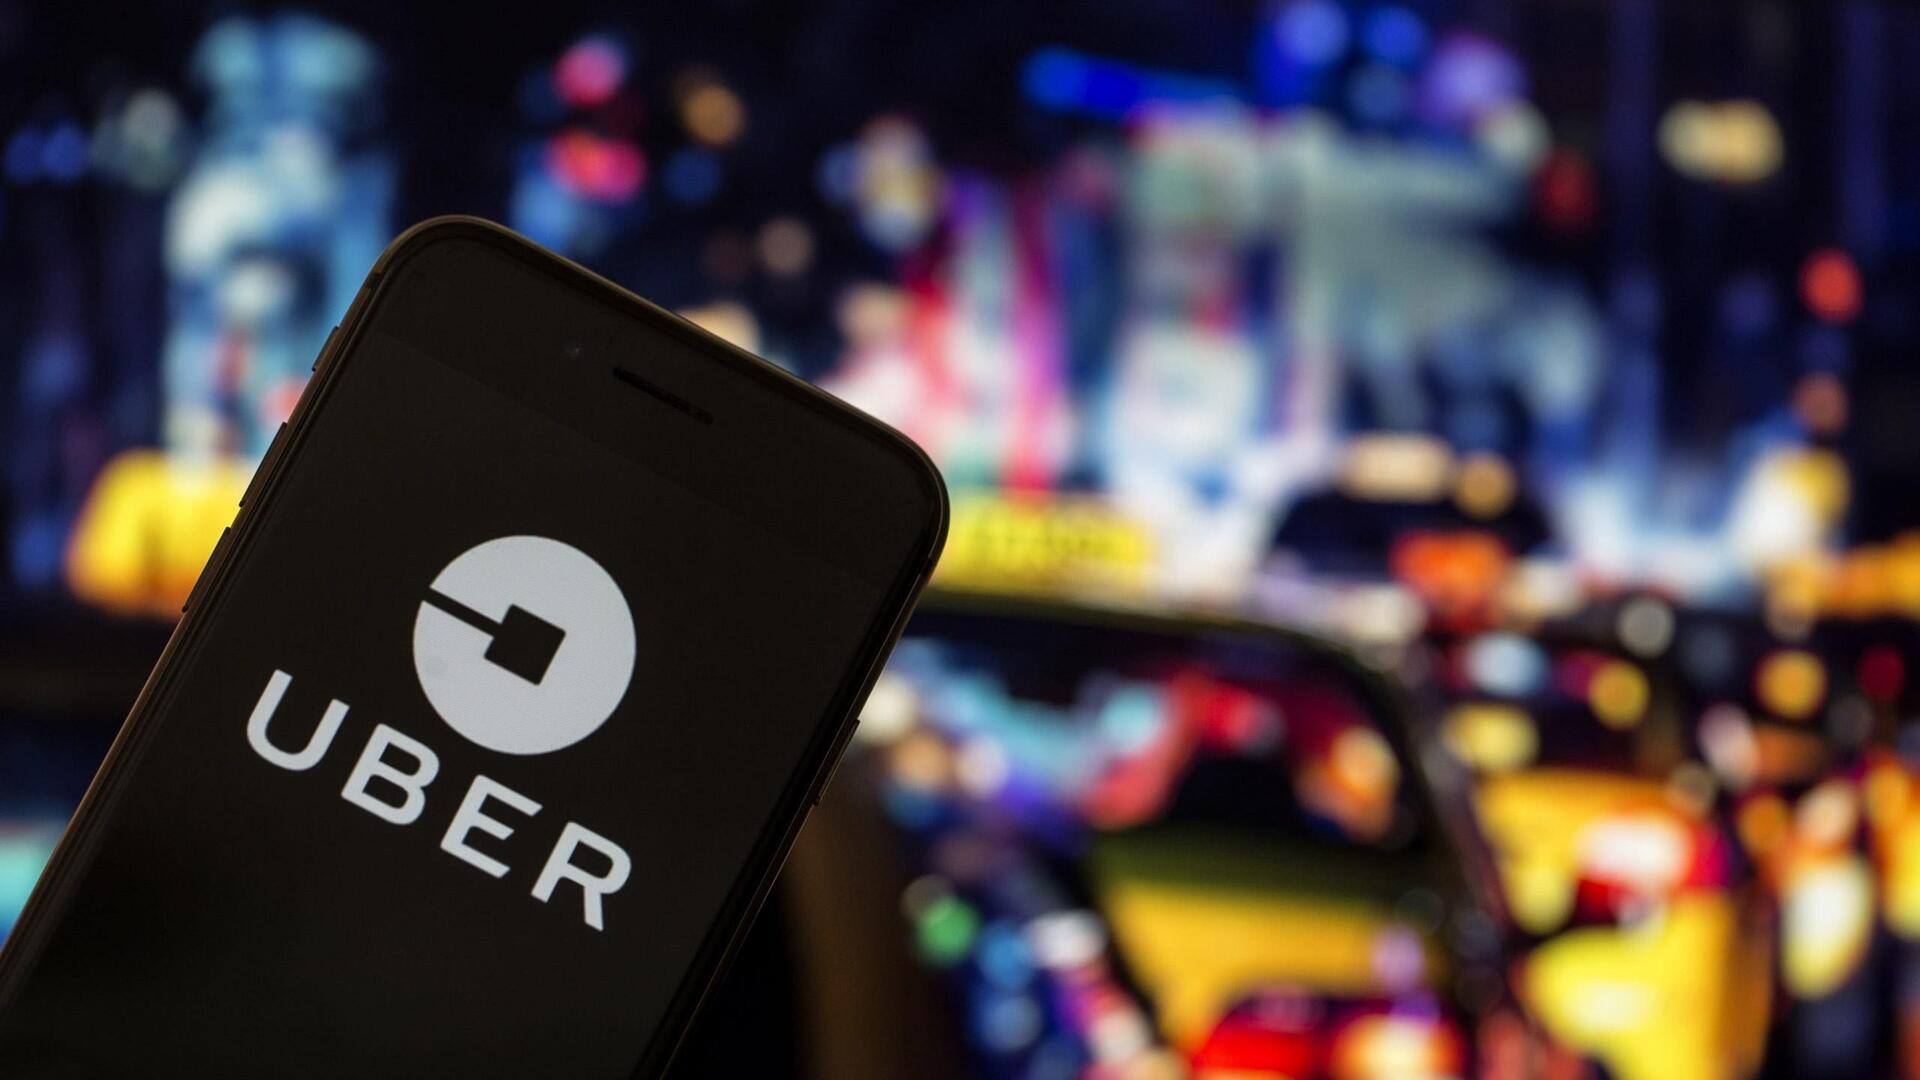 Uber partners with India's ONDC to expand mobility offerings